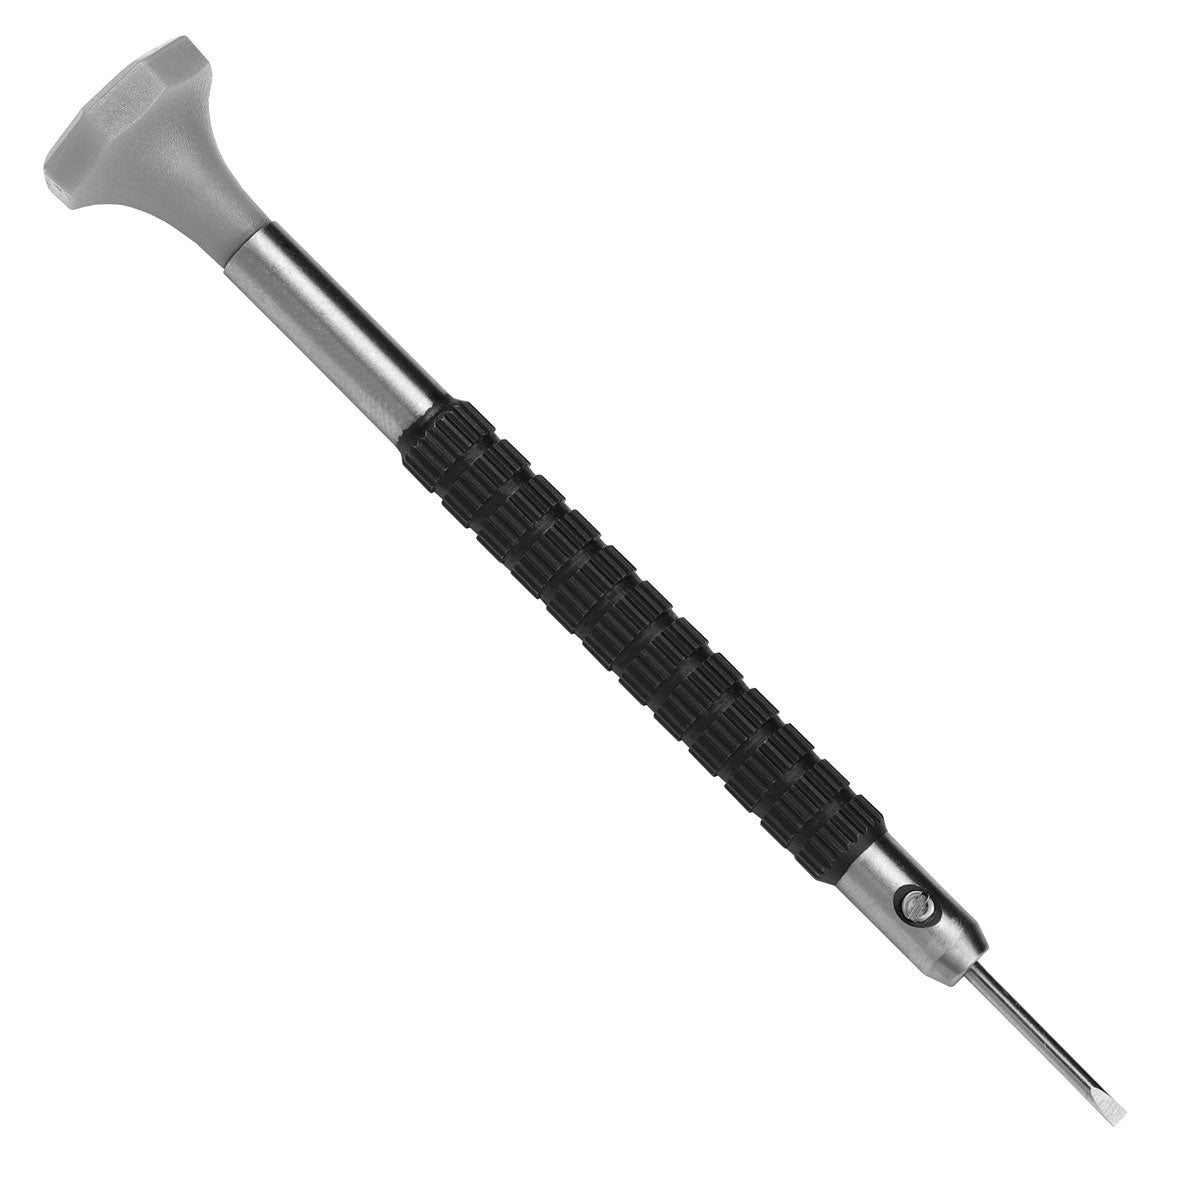 Screwdriver with 1.4mm Tip